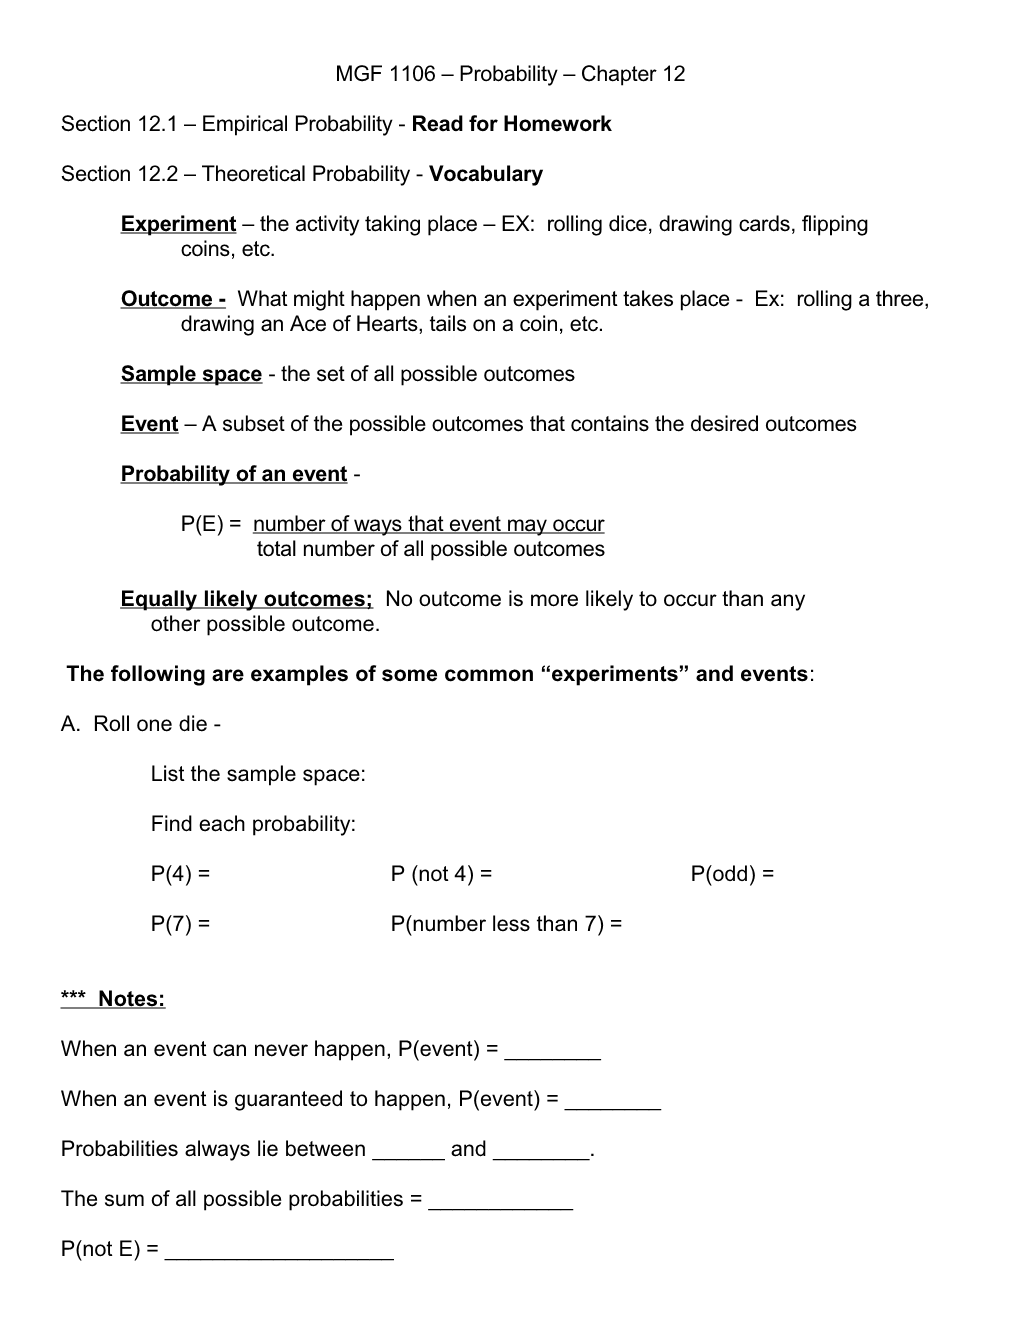 MGF 1106 - Probability - Chapter 12 Section 2